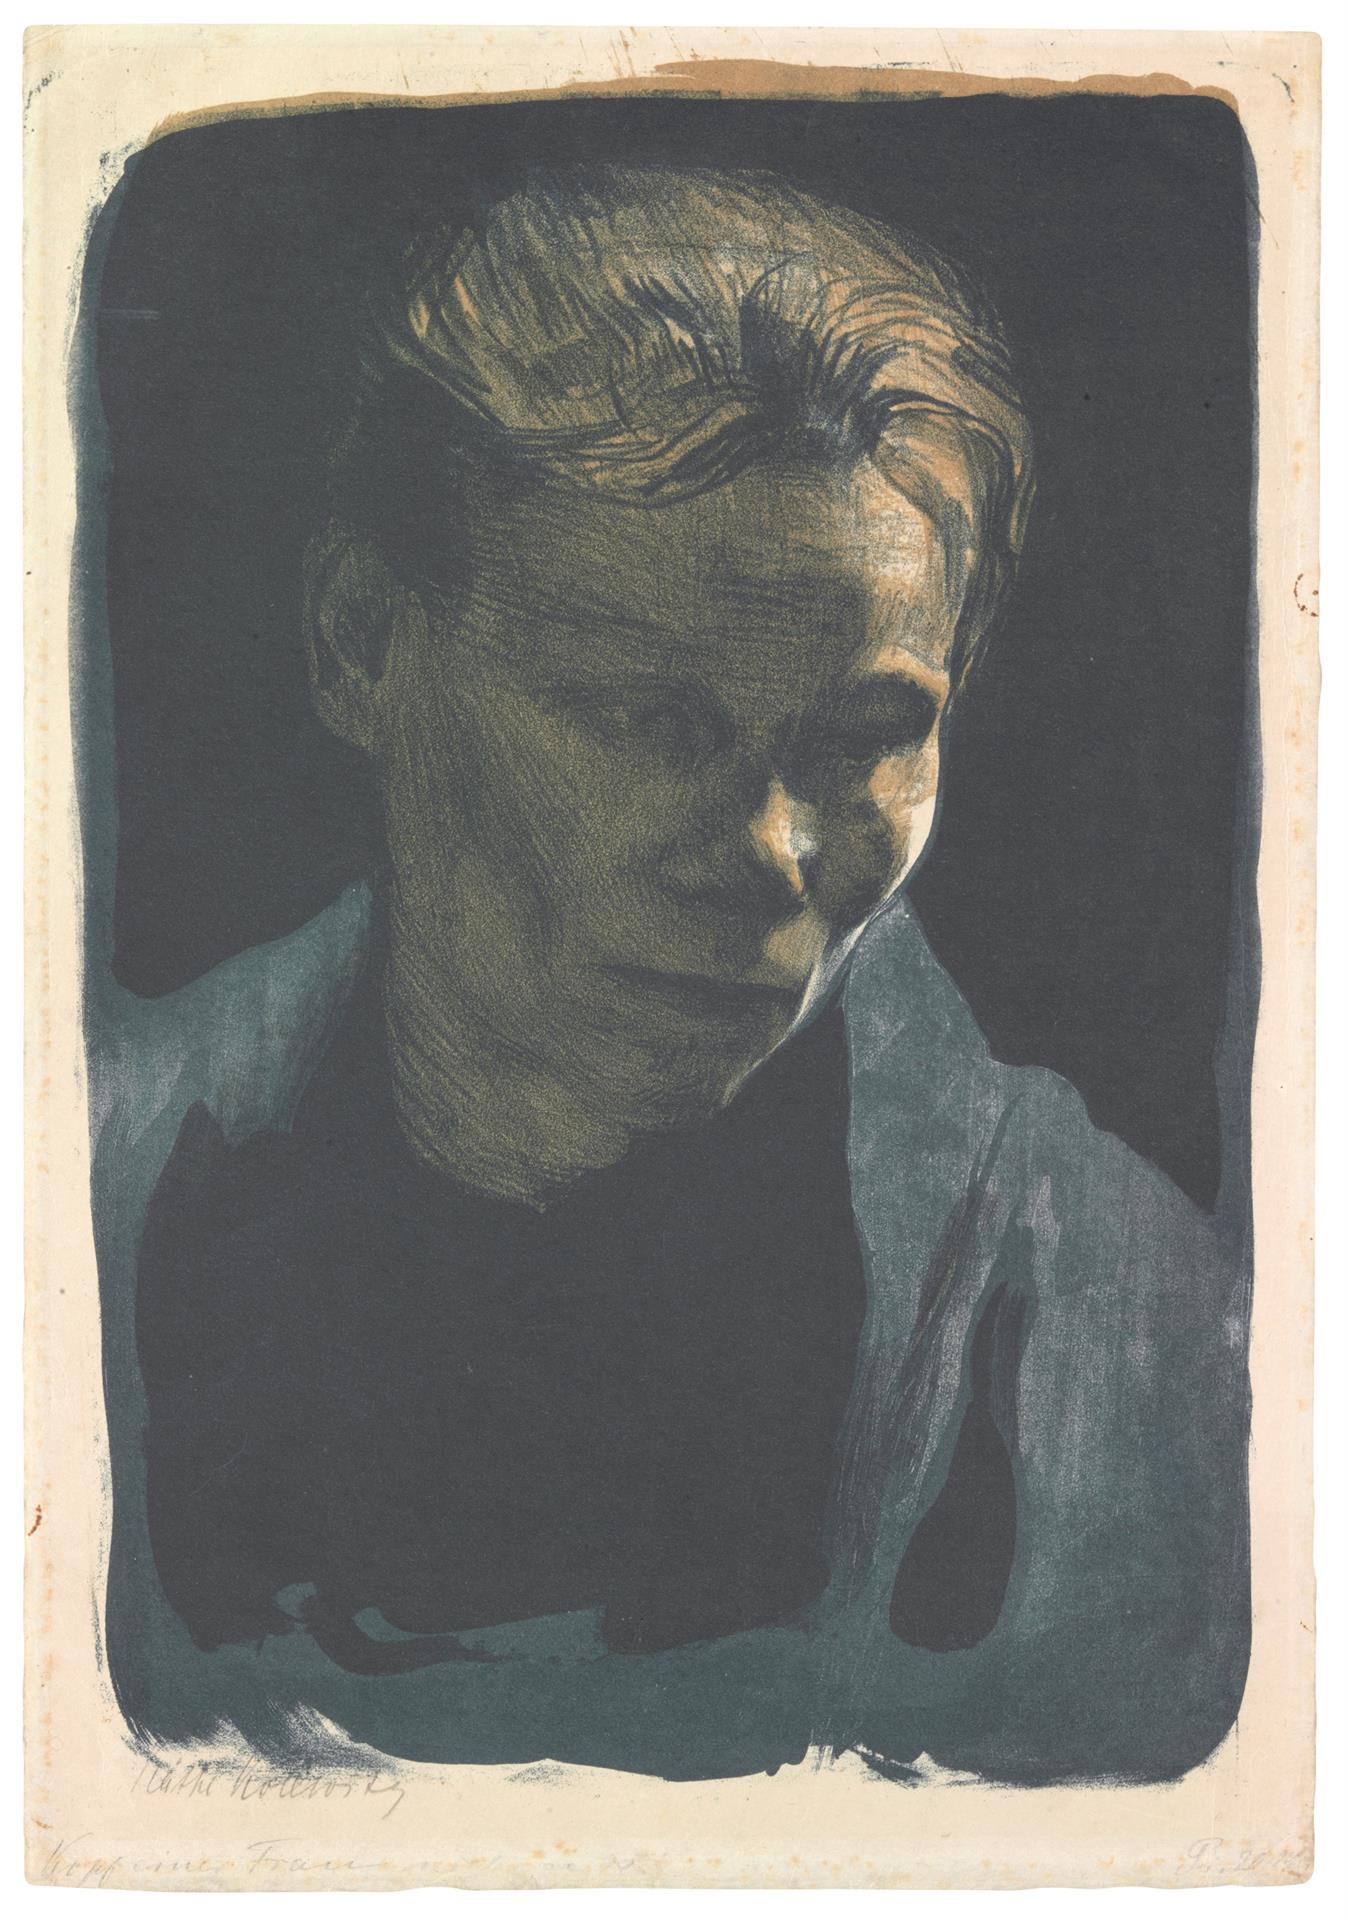 Käthe Kollwitz, Bust of a Worker Woman with Blue Shawl, 1903, crayon and brush lithograph in two colors, with scratch technique in the drawing stone, printed blue, Kn 75 A I 1, Cologne Kollwitz Collection © Käthe Kollwitz Museum Köln